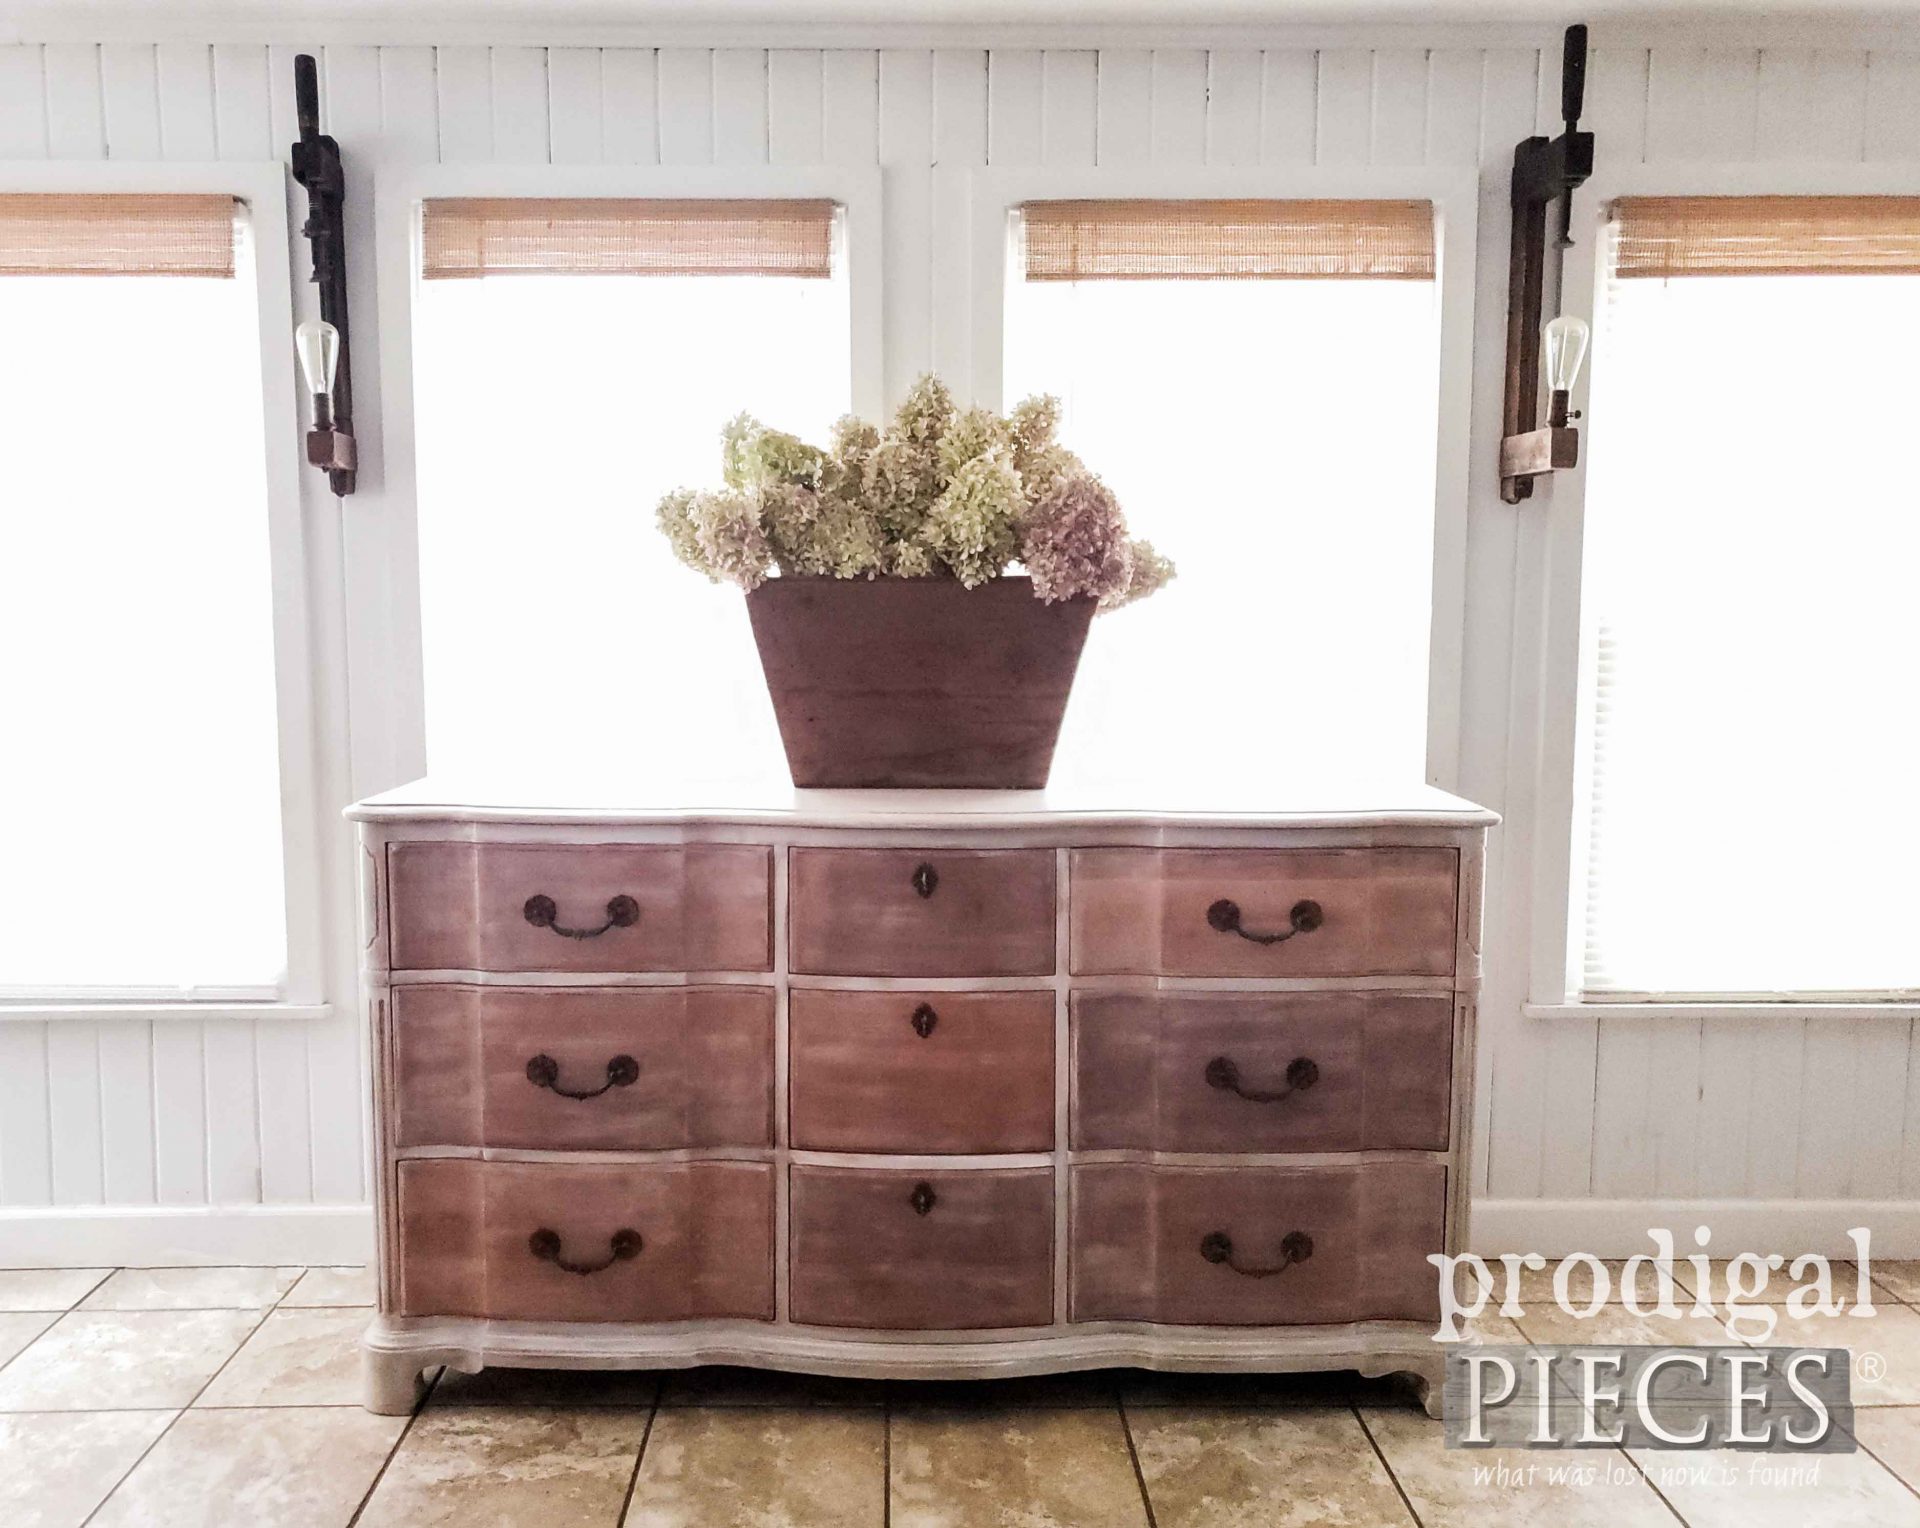 French Country Dresser with Serpentine Front by Larissa of Prodigal Pieces | prodigalpieces.com #prodigalpieces #furniture #farmhouse #french #home #homedecor